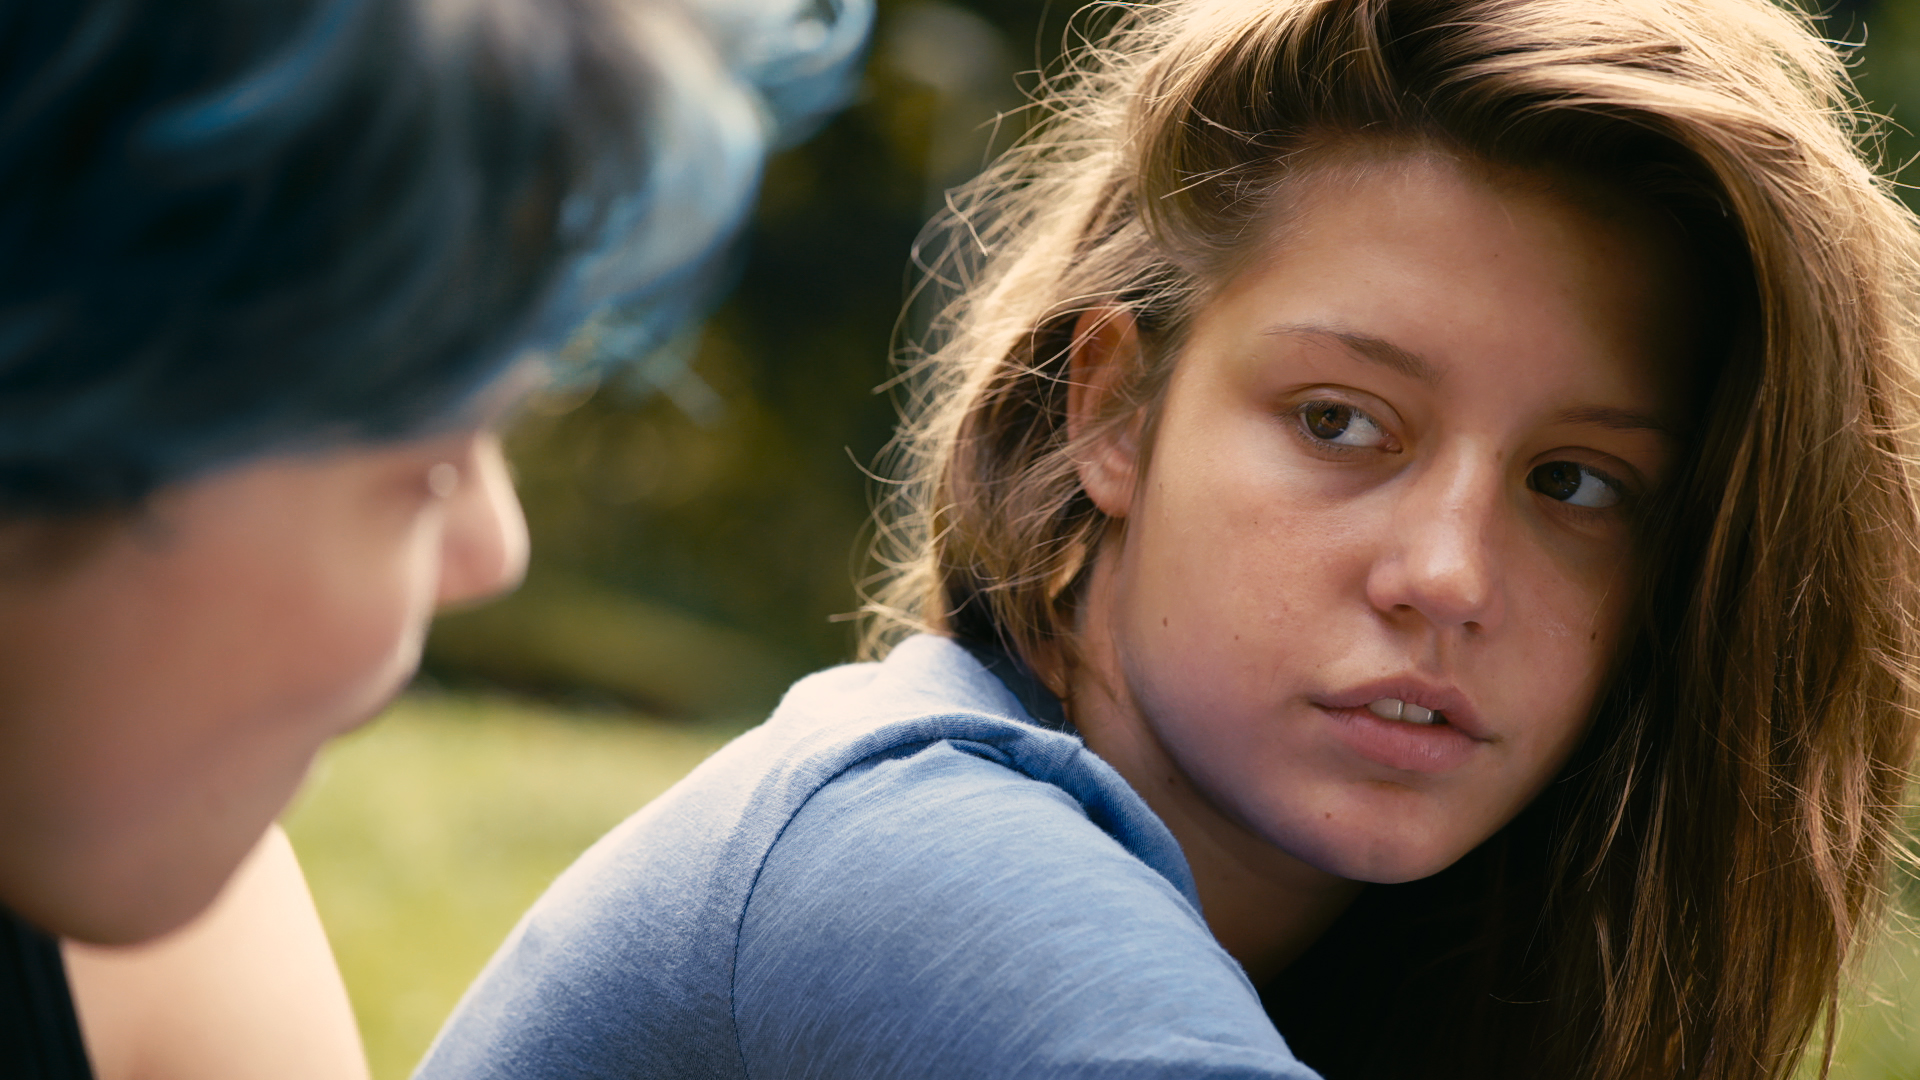 Taking their time: Seydoux (left) and Exarchopoulos.